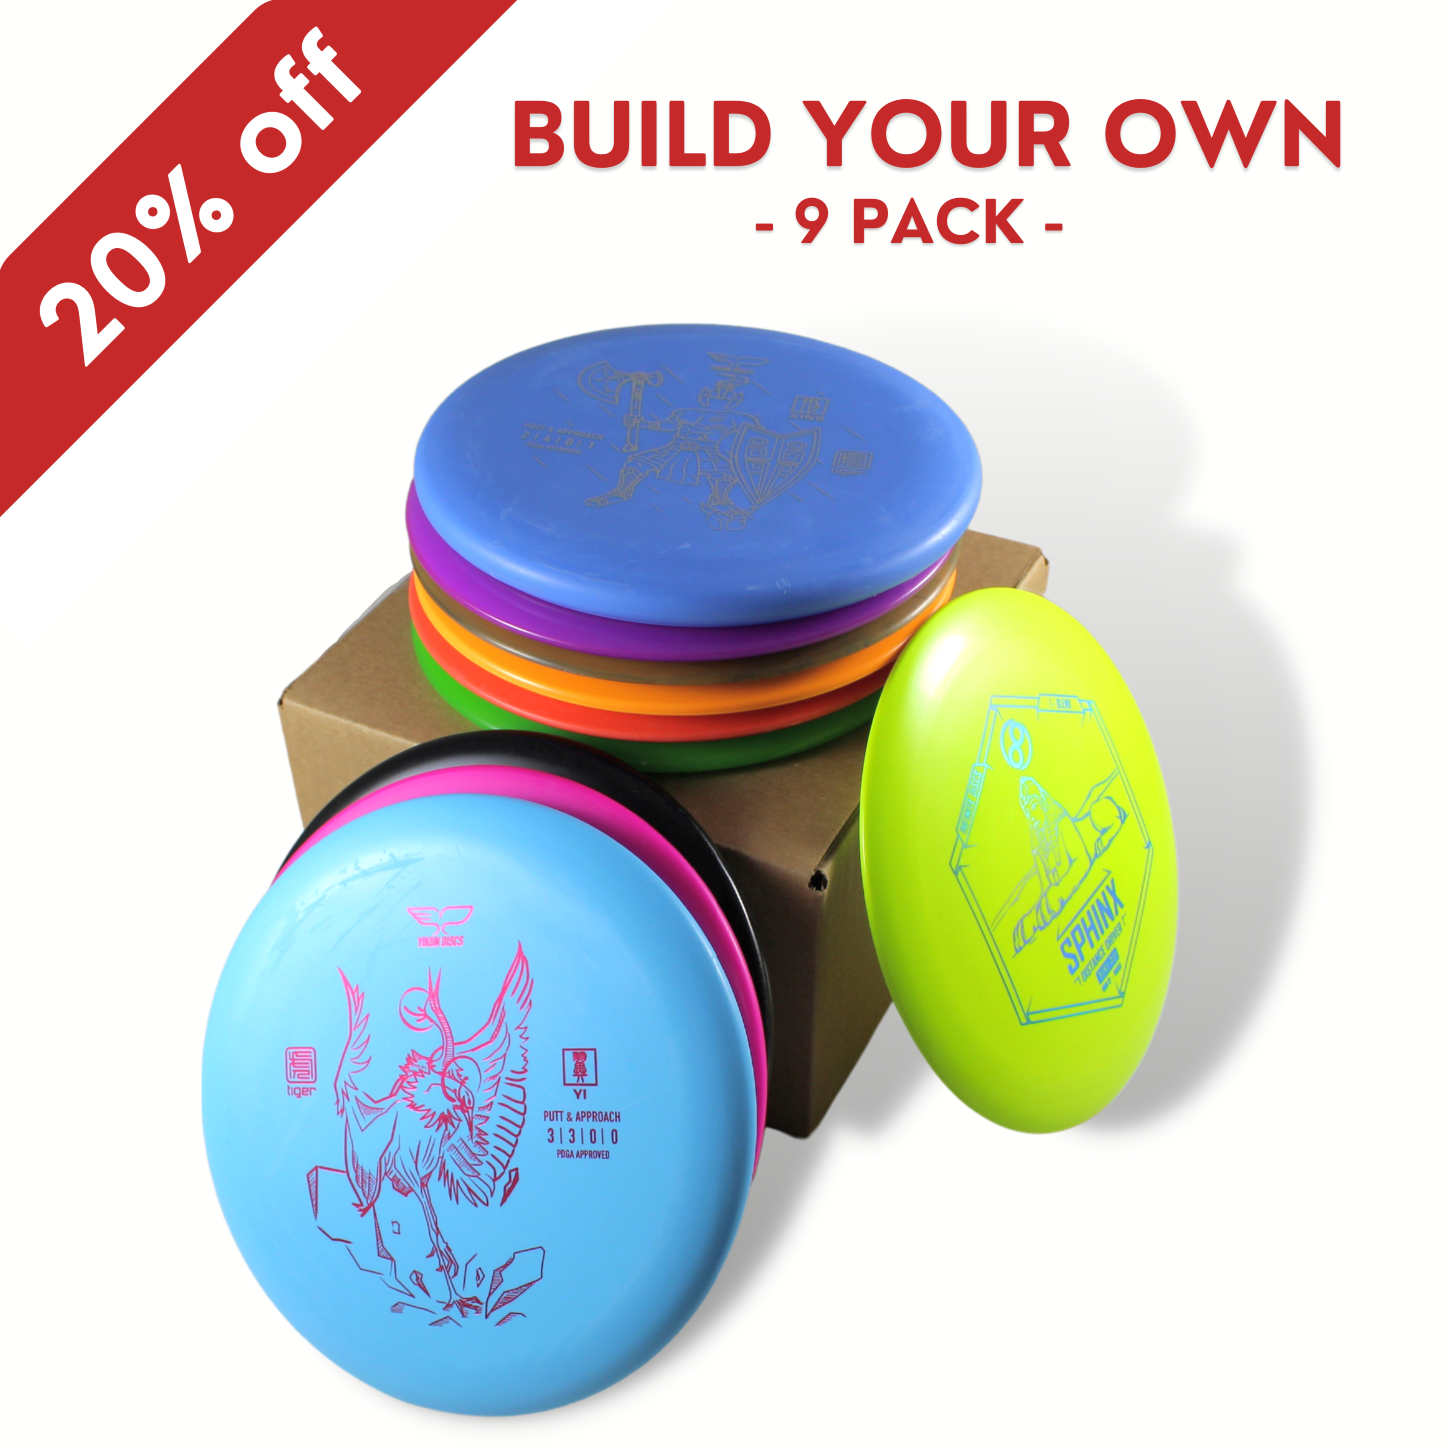 Build Your Own 9 Pack - 20% Off